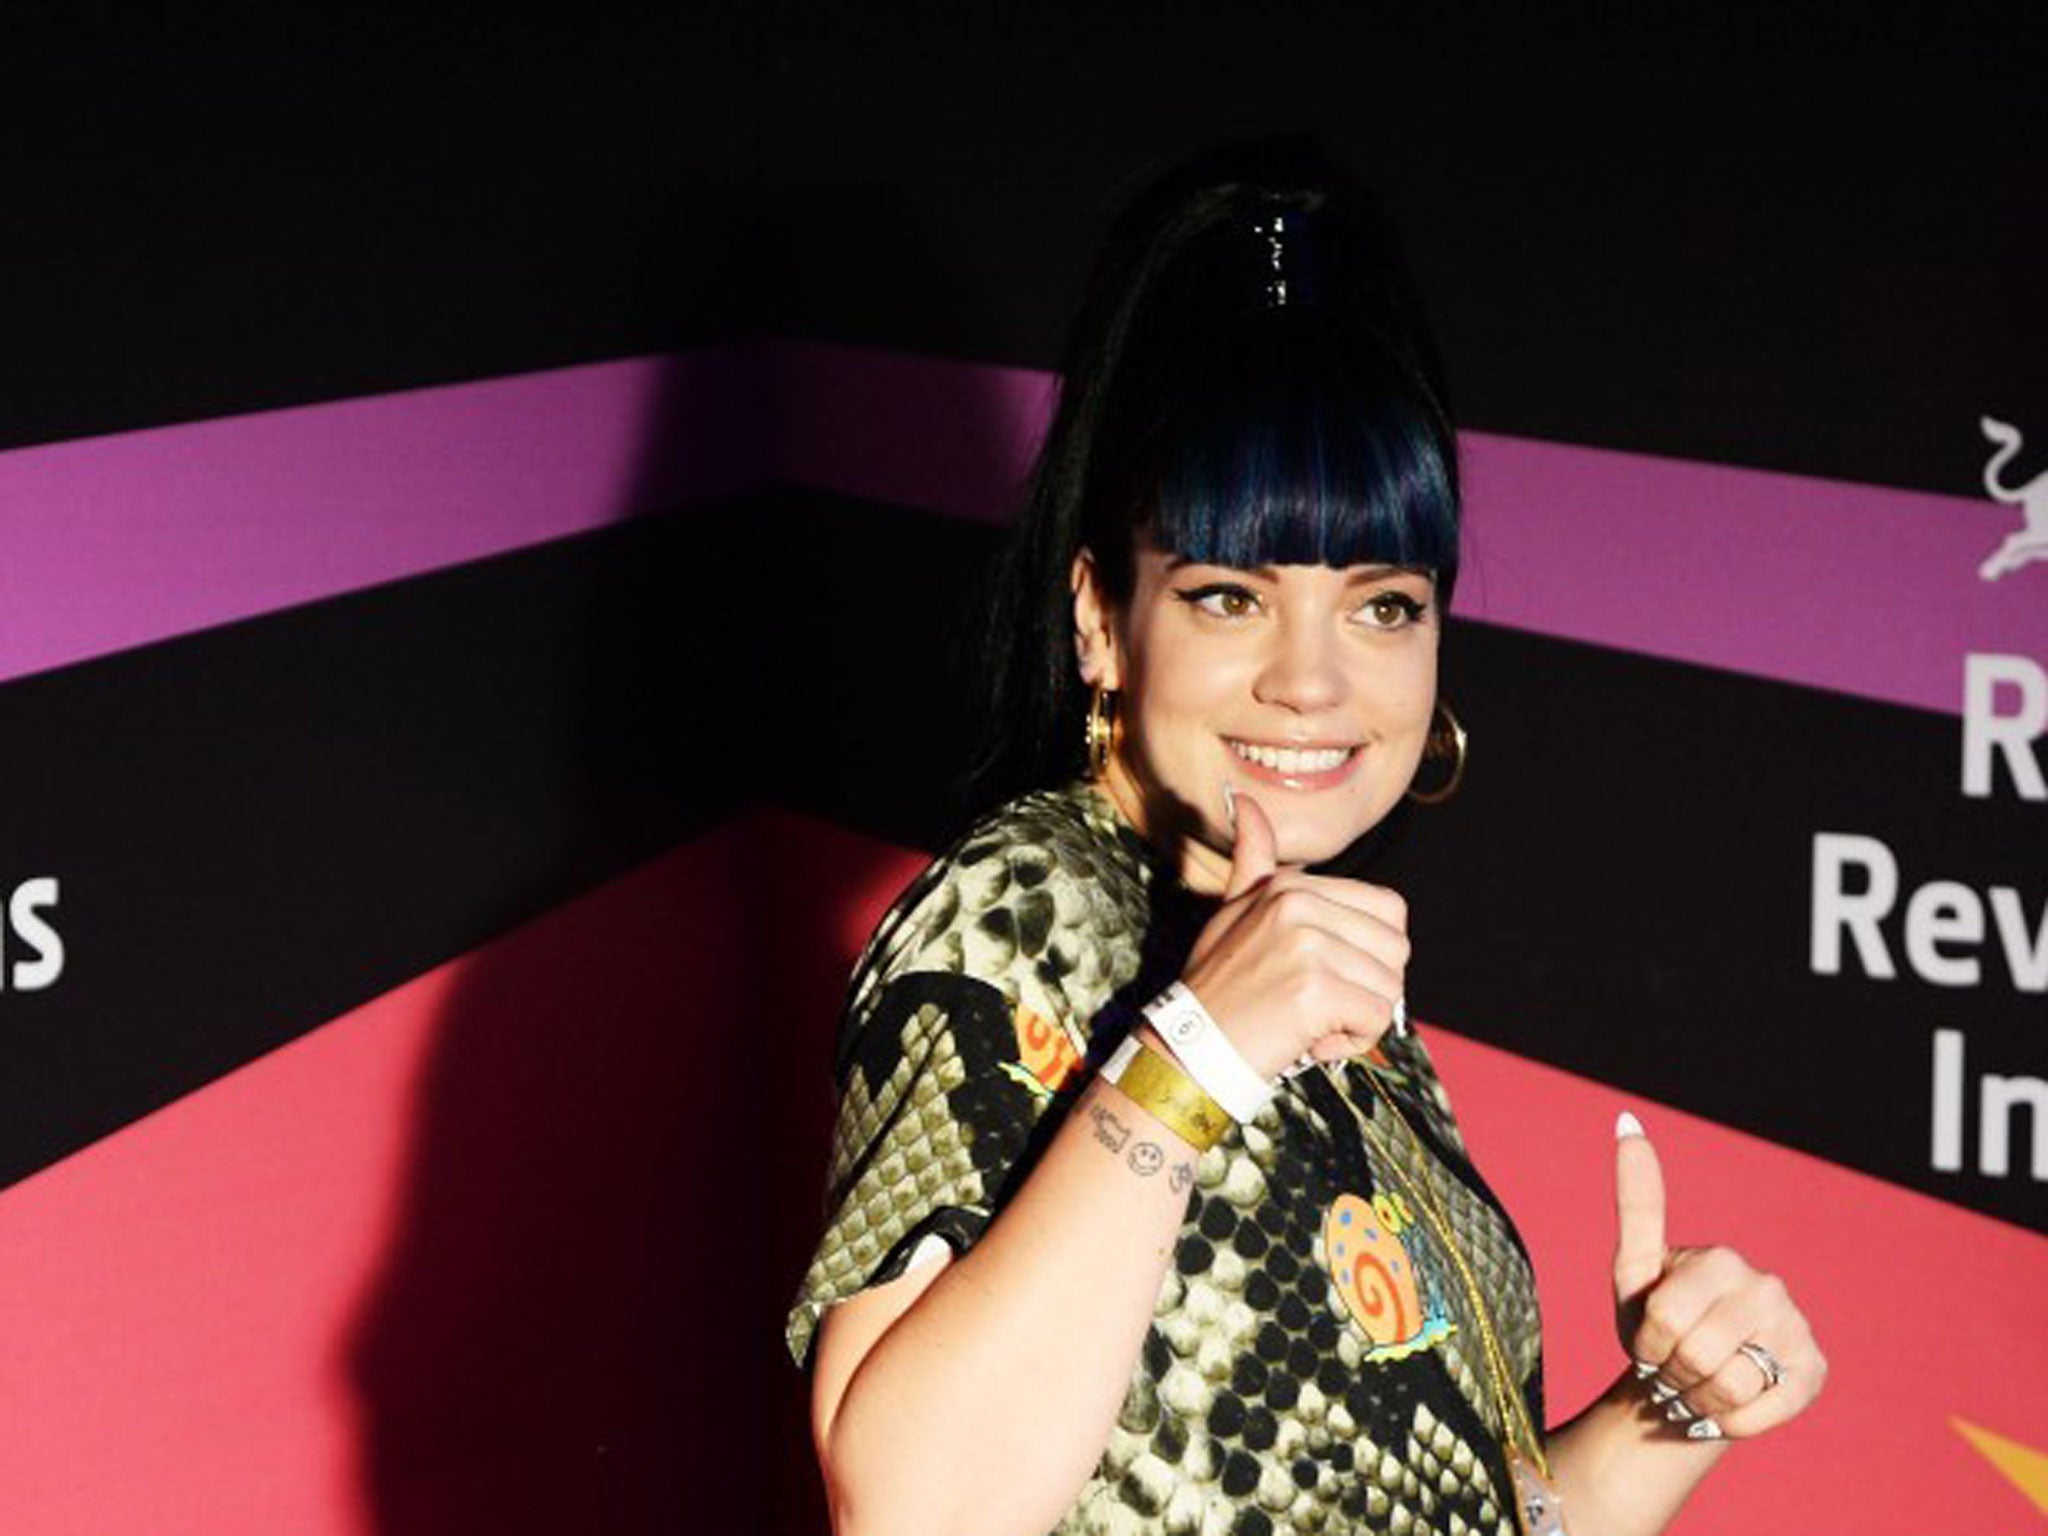 Singer Lily Allen has self-confirmed that she will be playing Glastonbury next year